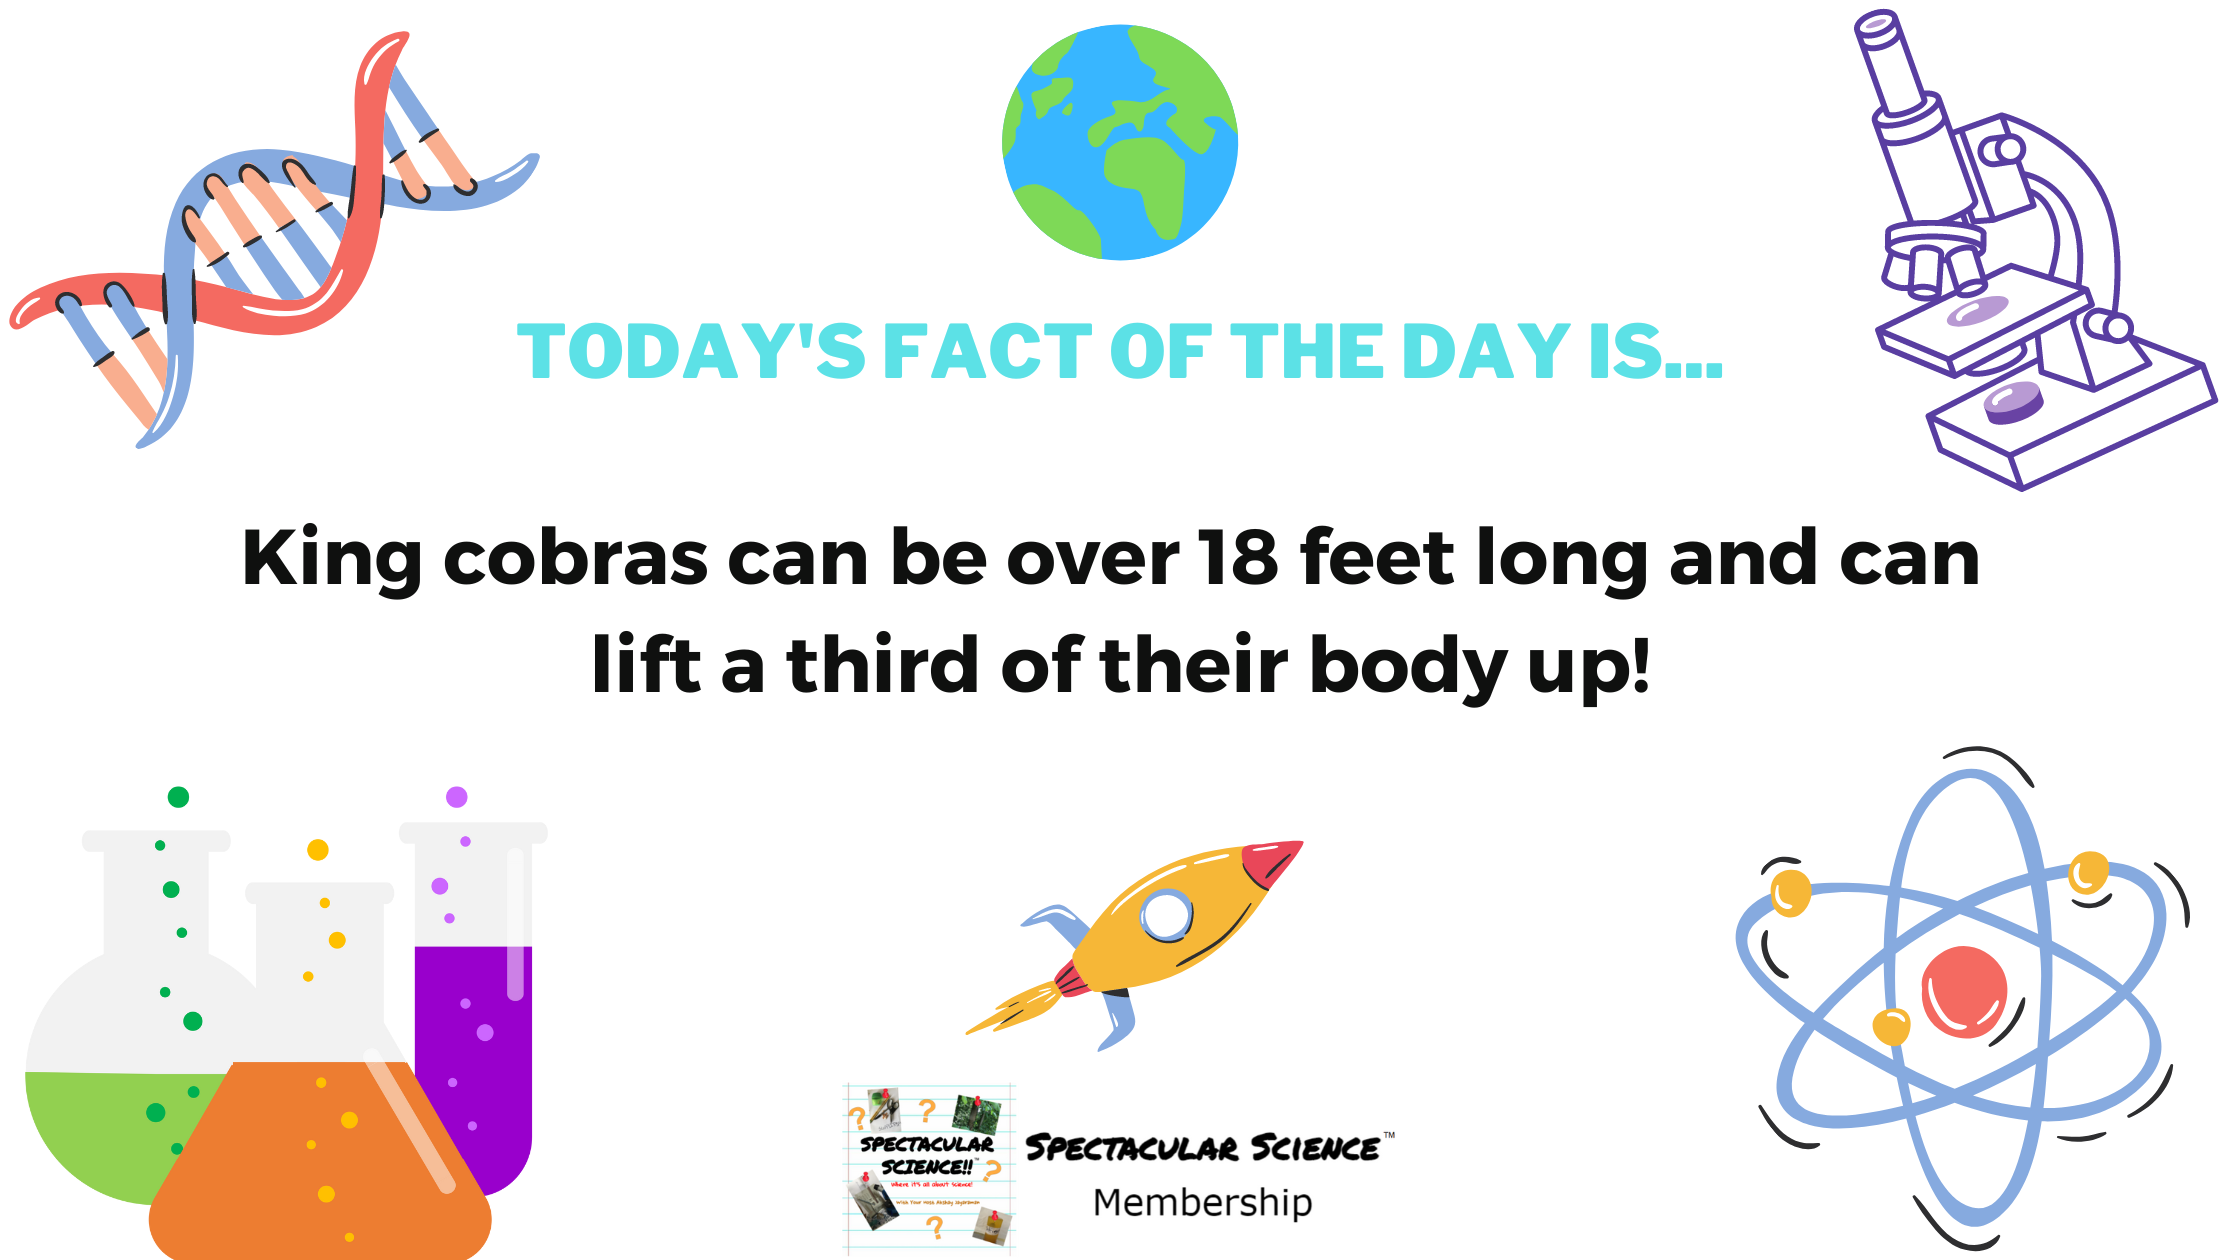 Fact of the Day Image August 24th